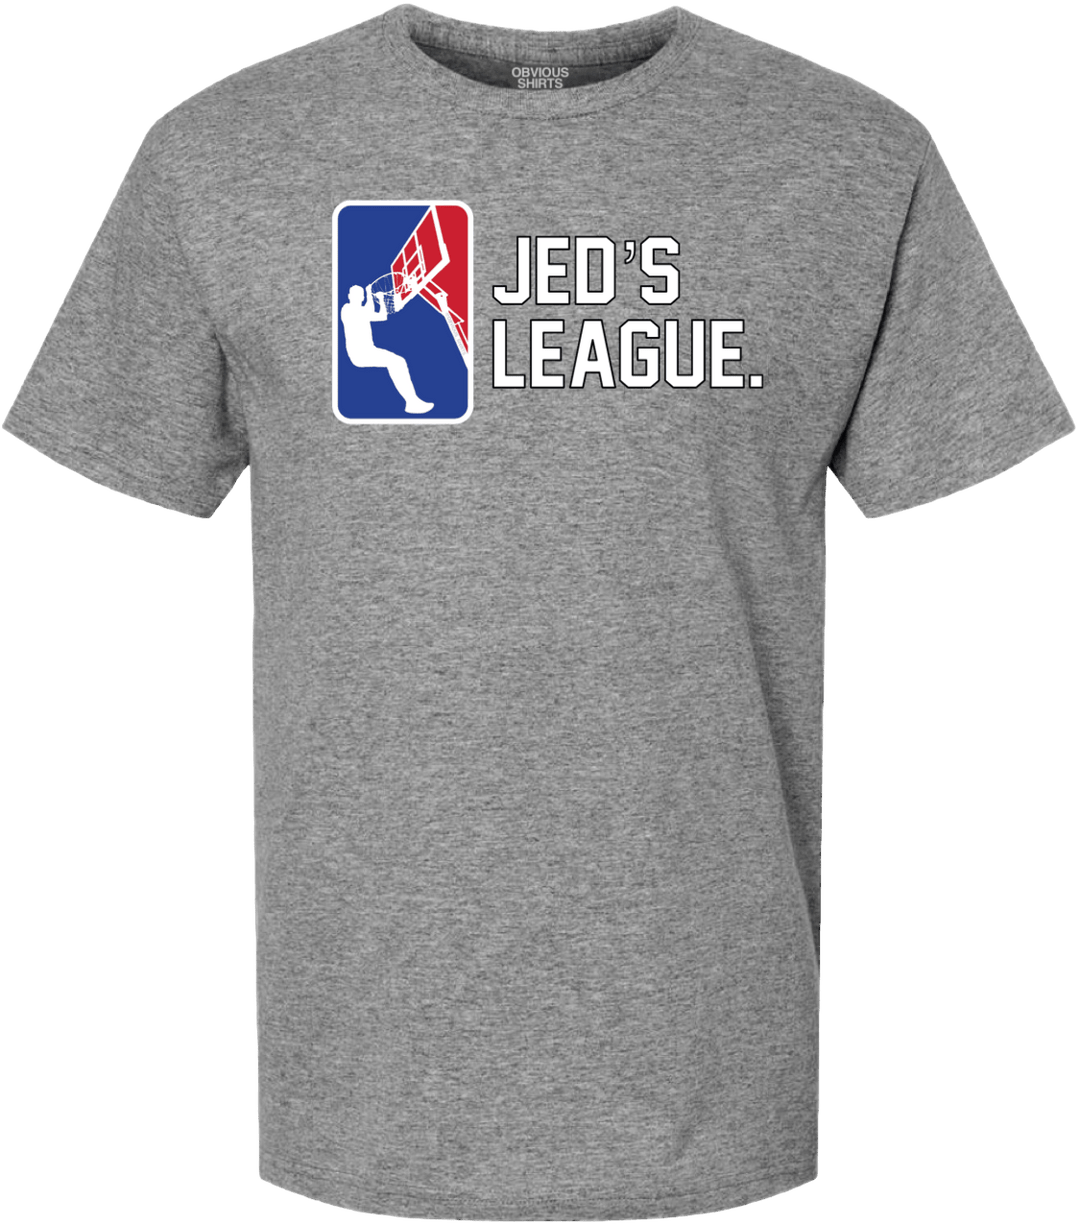 JED'S LEAGUE. - OBVIOUS SHIRTS